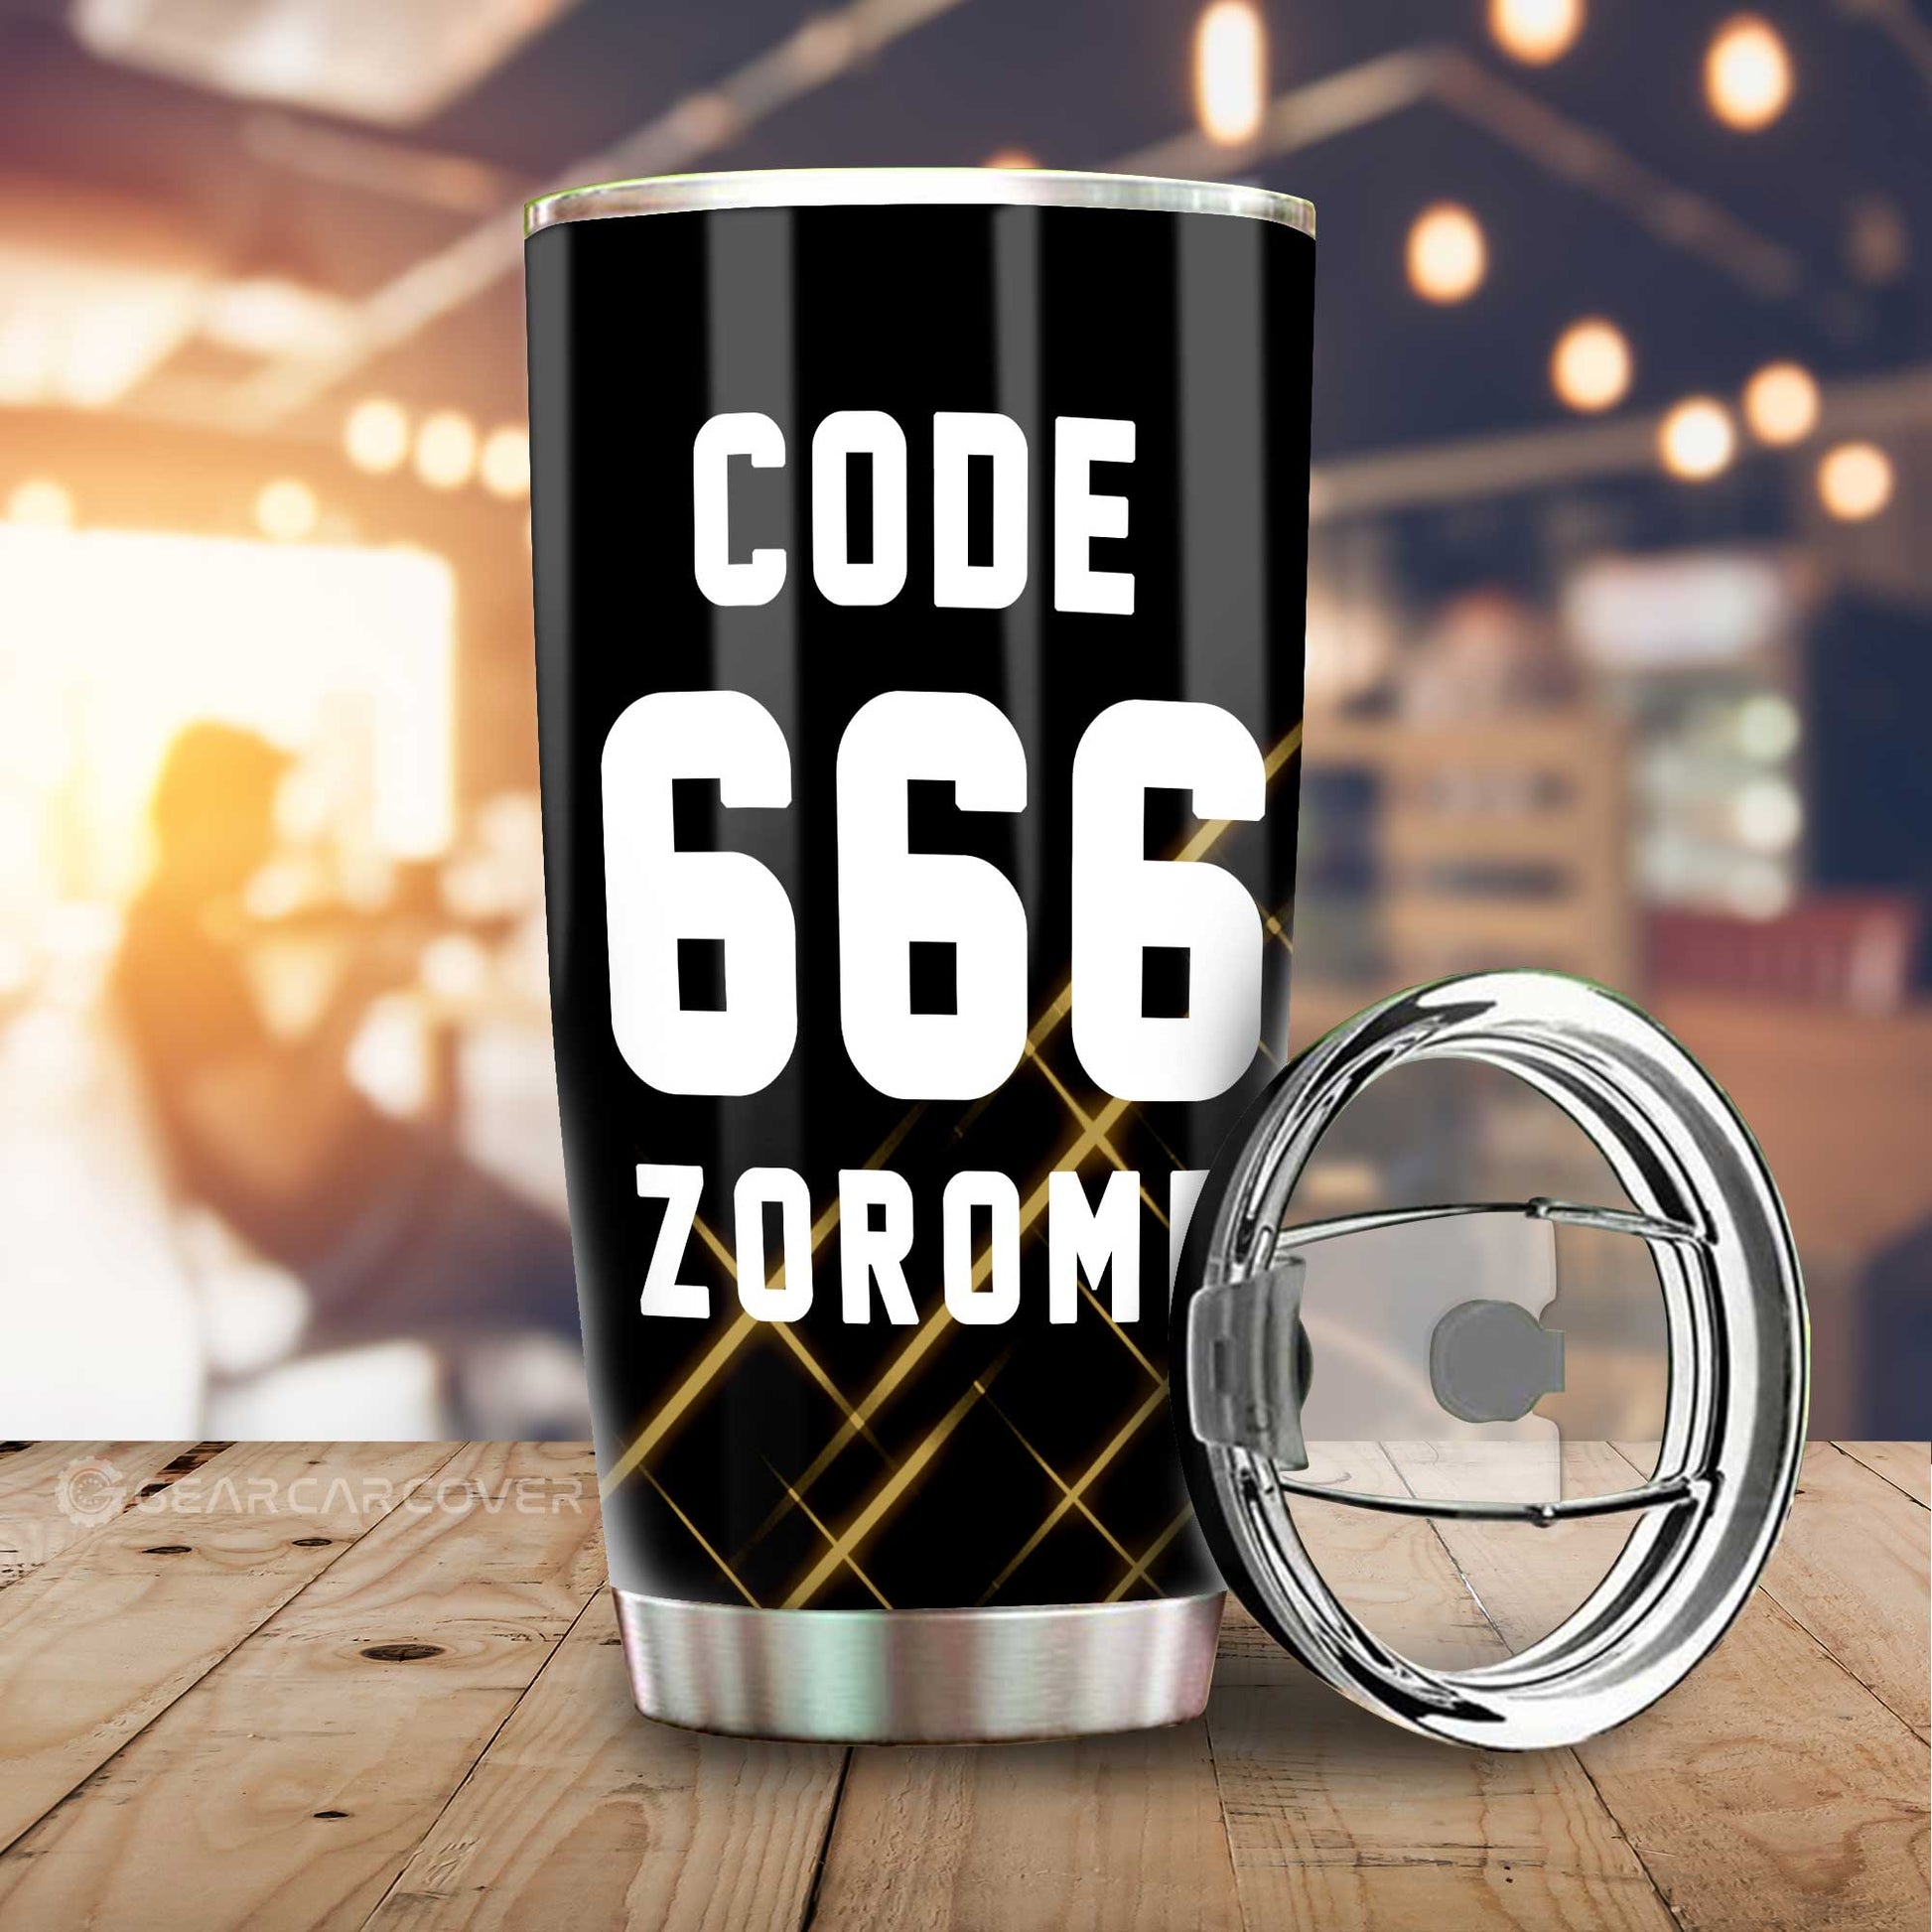 Code:666 Zorome Tumbler Cup Custom DARLING In The FRANXX Anime Car Accessories - Gearcarcover - 2